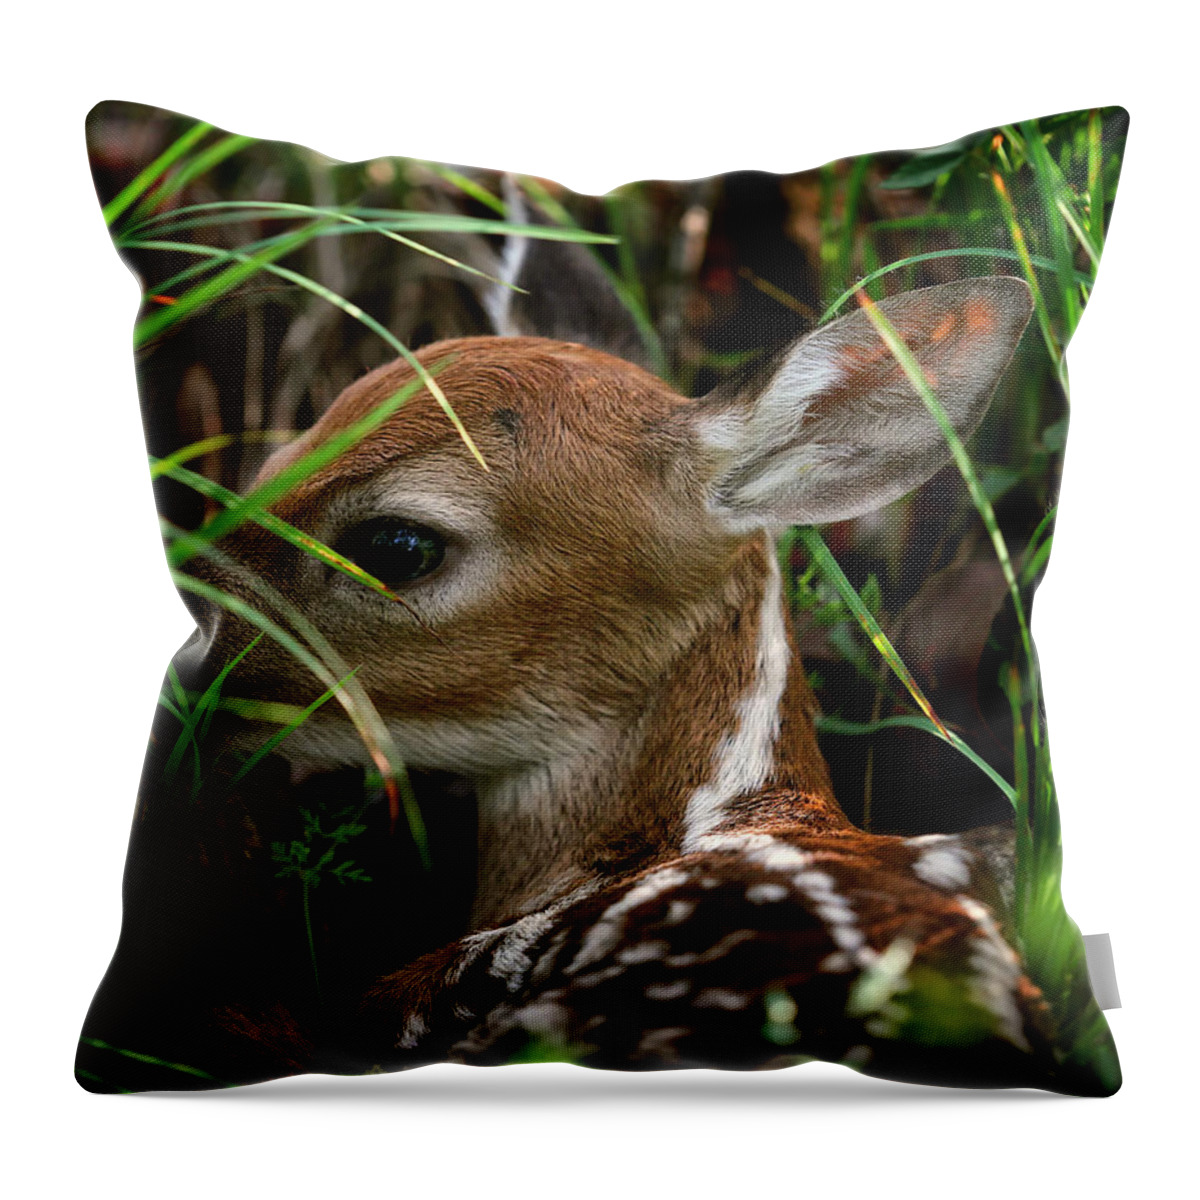 Whitetail Deer Throw Pillow featuring the photograph Waiting Fawn by Michael Dougherty